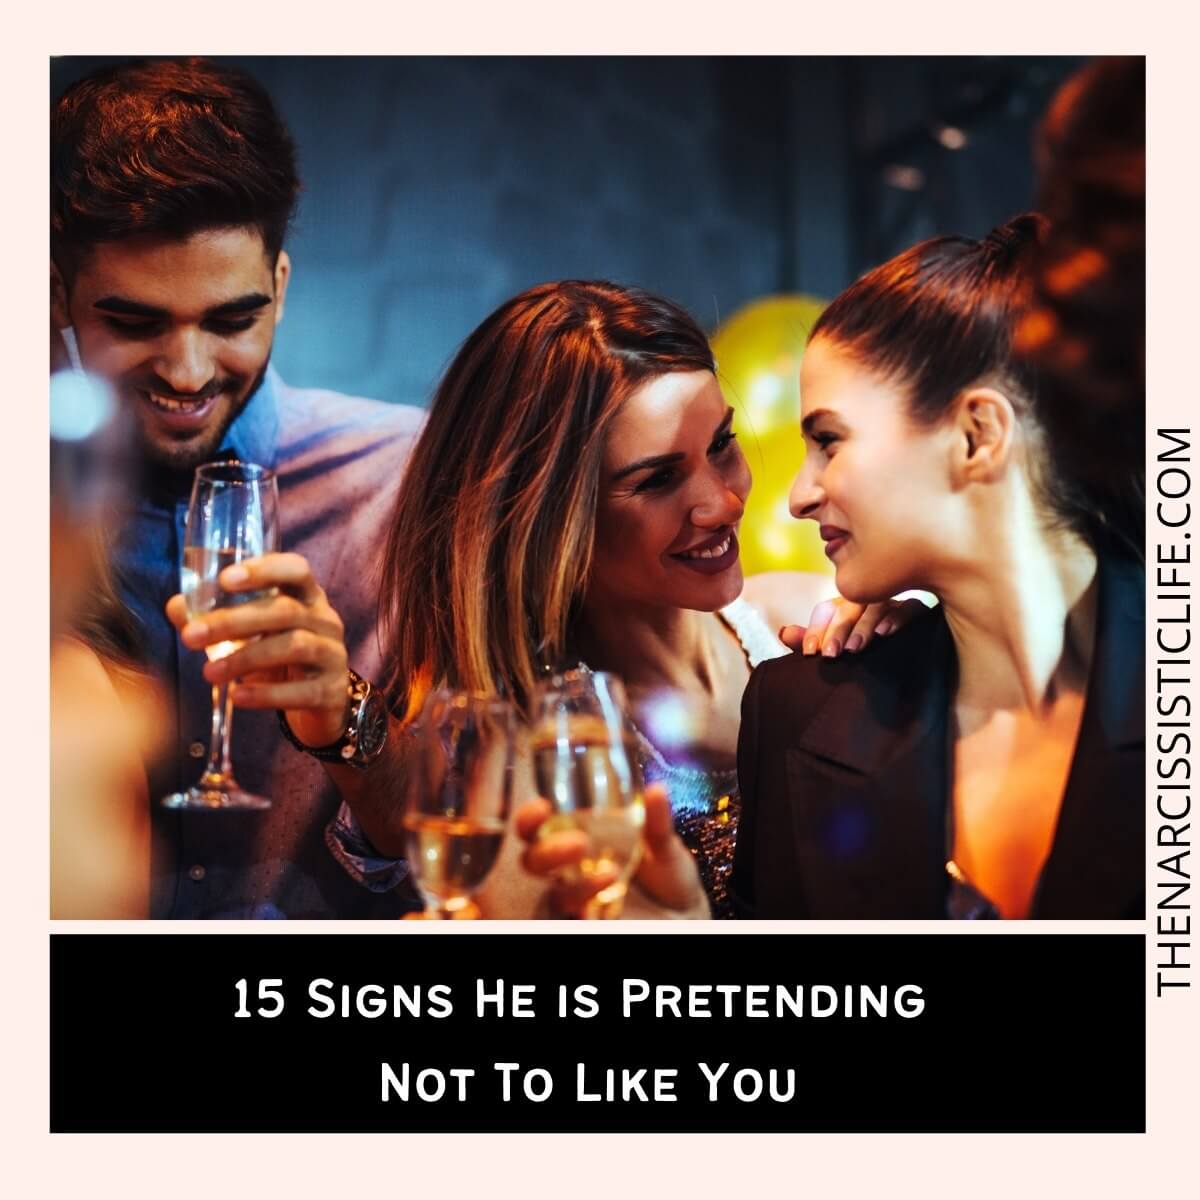 Signs he pretending not to like you